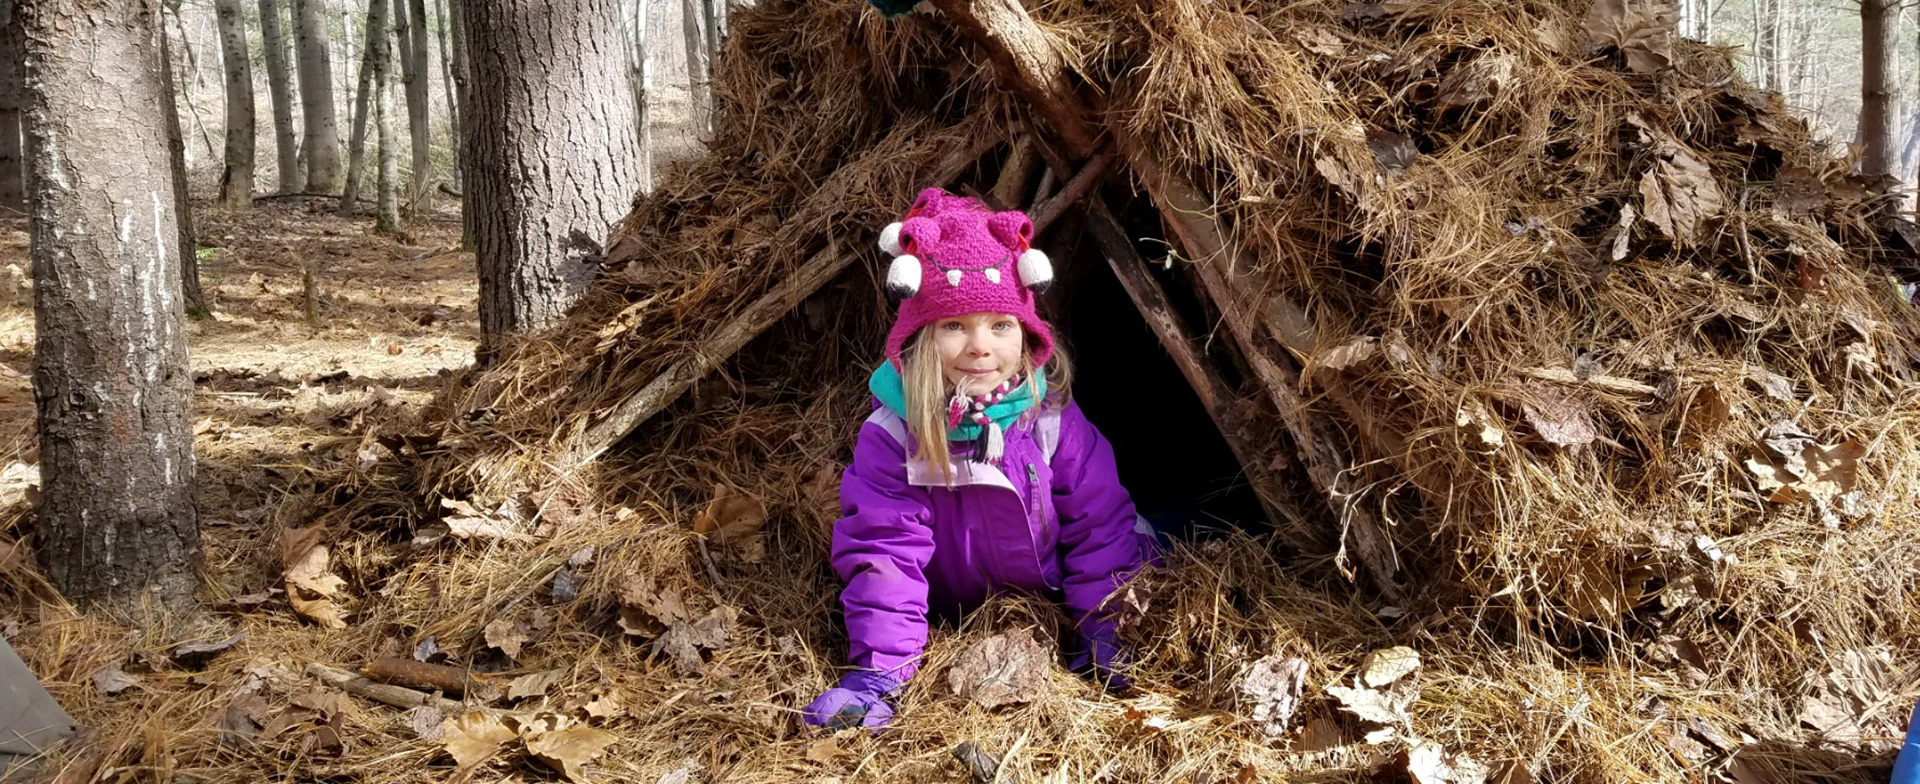 Girl crawling out of primitive structure in forest during winter homeschool nature class